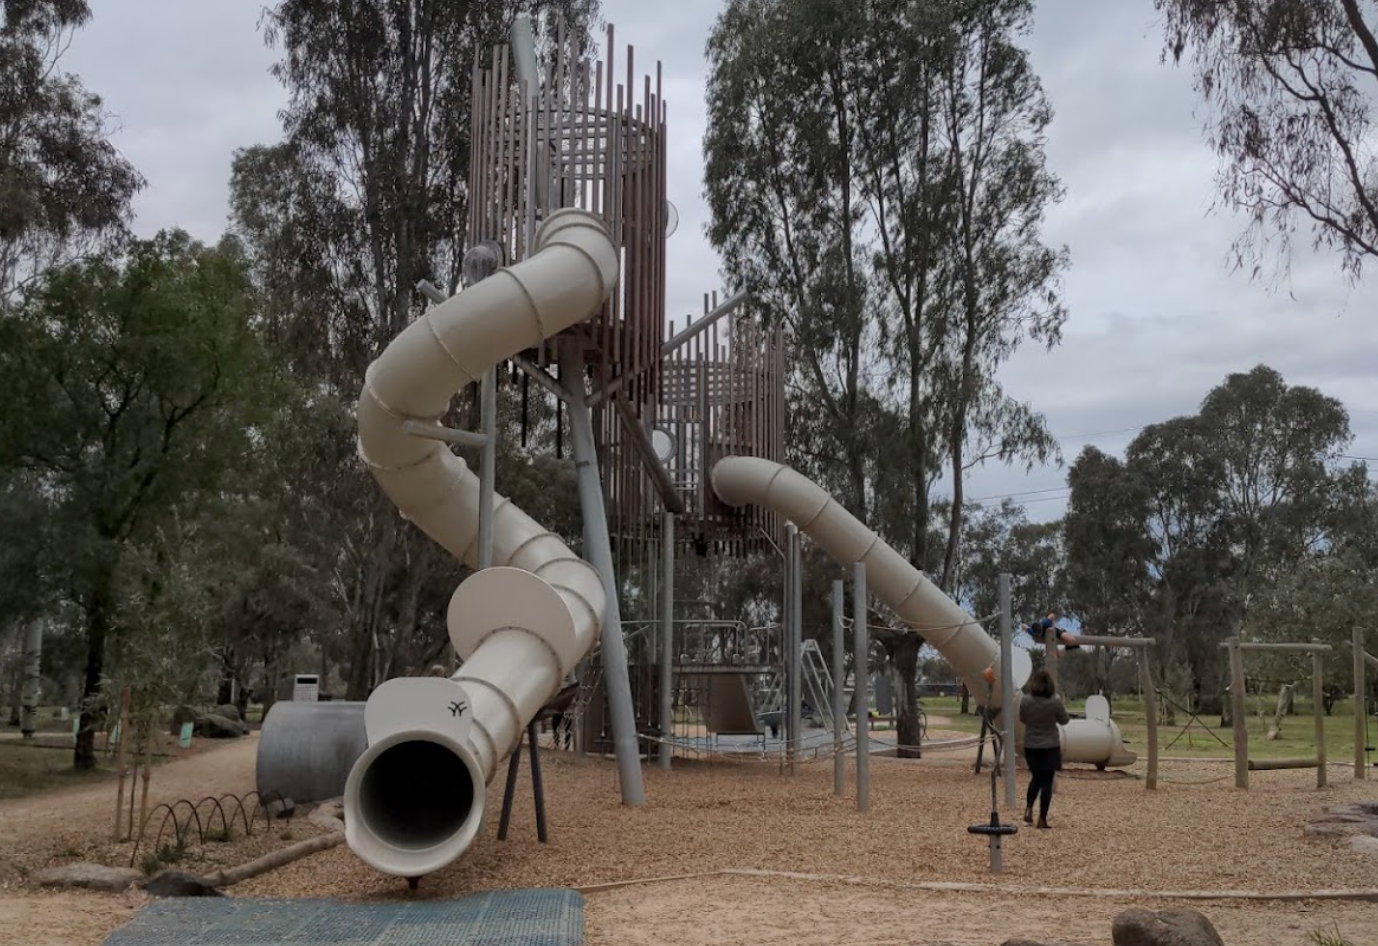 Pipemakers Park Play Space